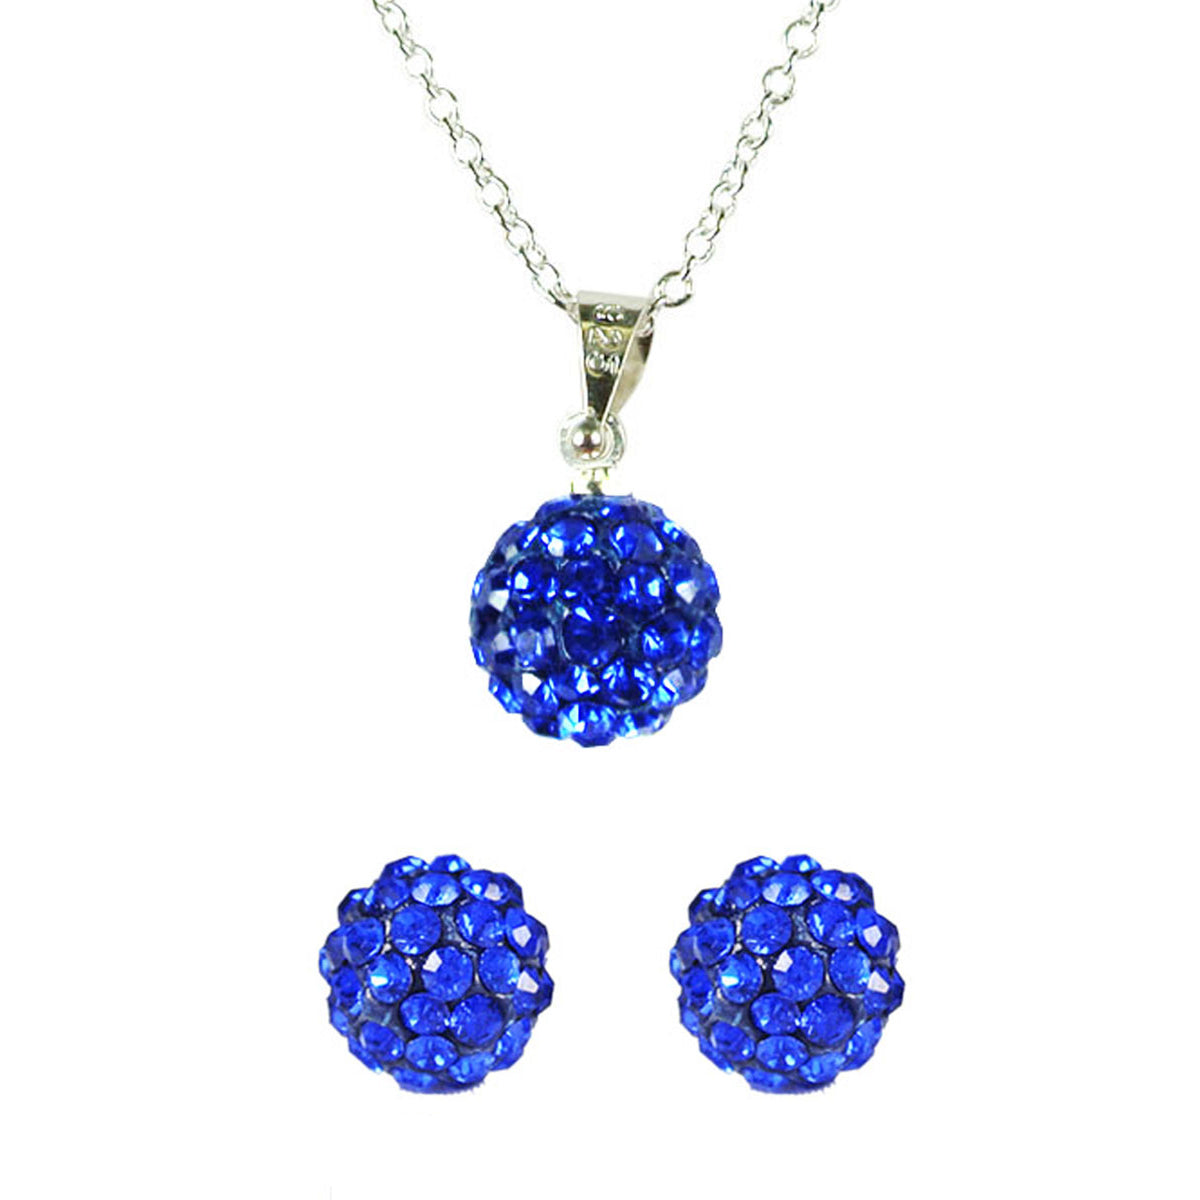 Crystal Disco Ball Pendant Necklace and Stud Earrings Jewelry Set